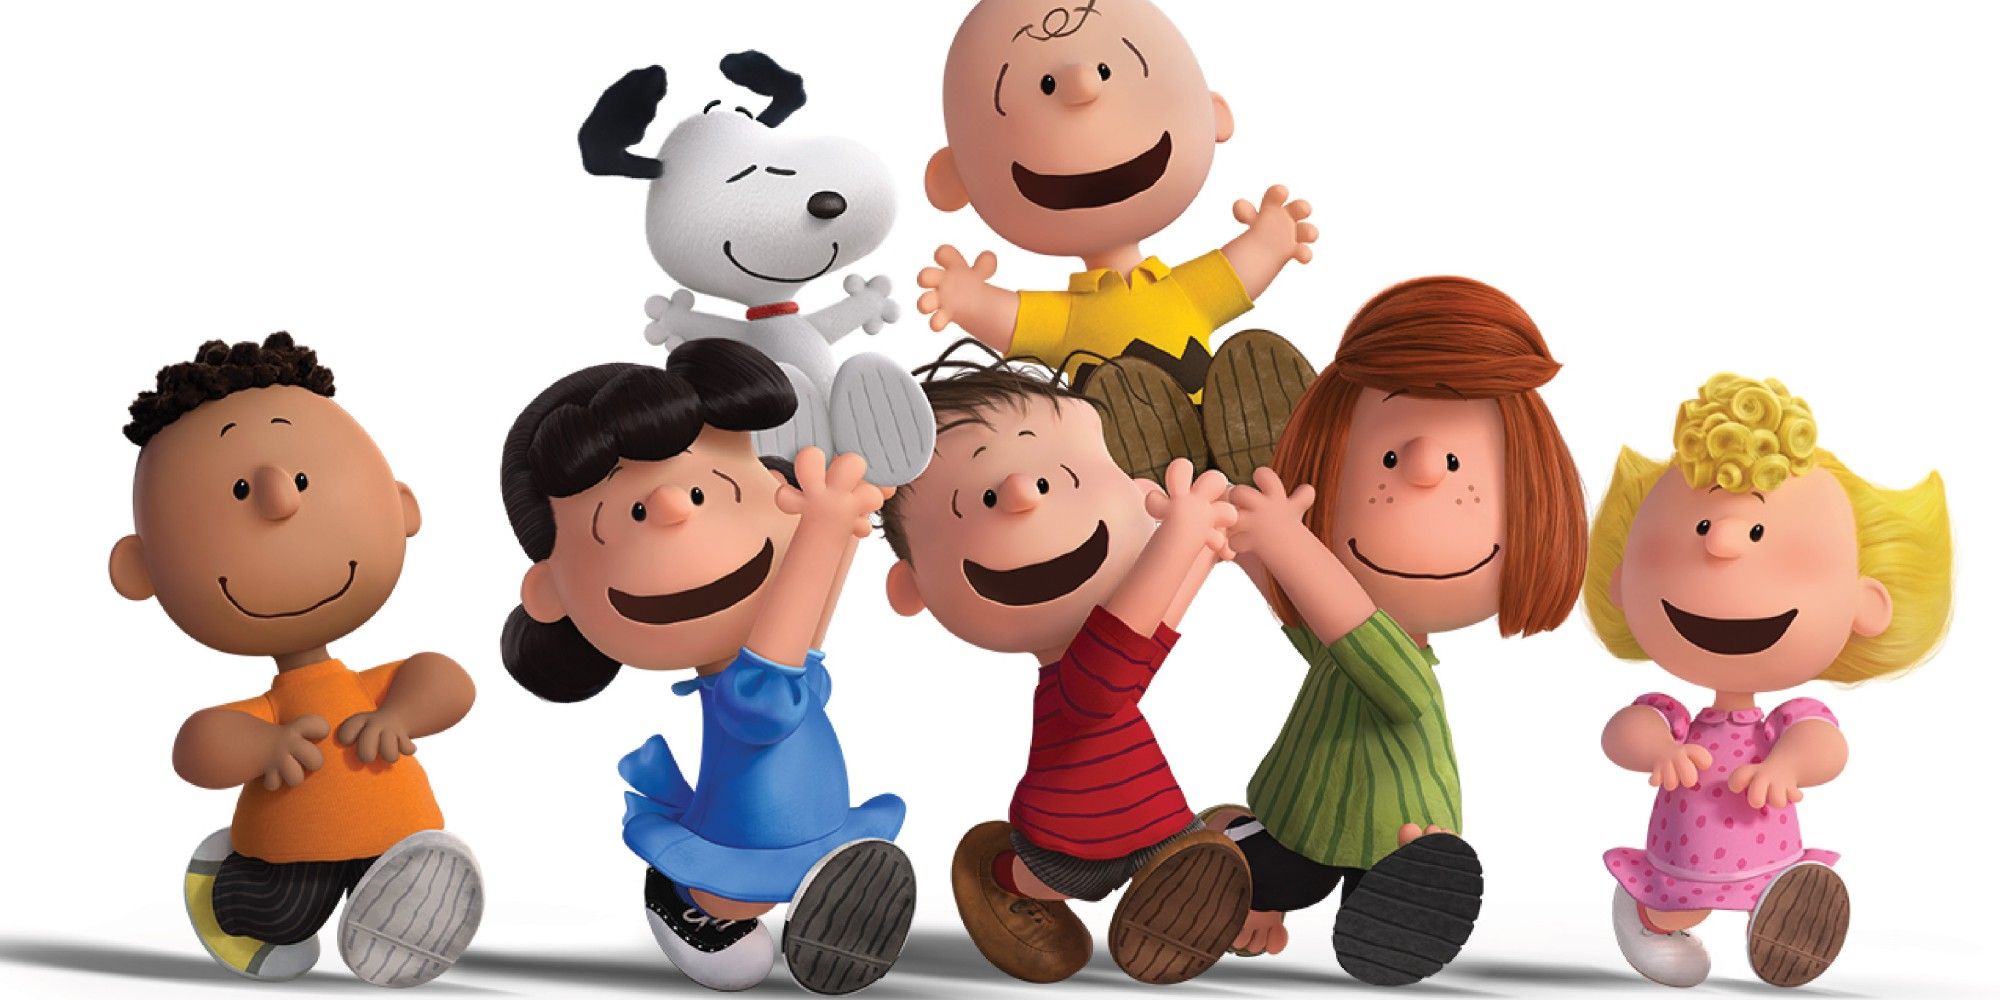 Peanuts Holiday Specials Will Air On Broadcast TV This Year